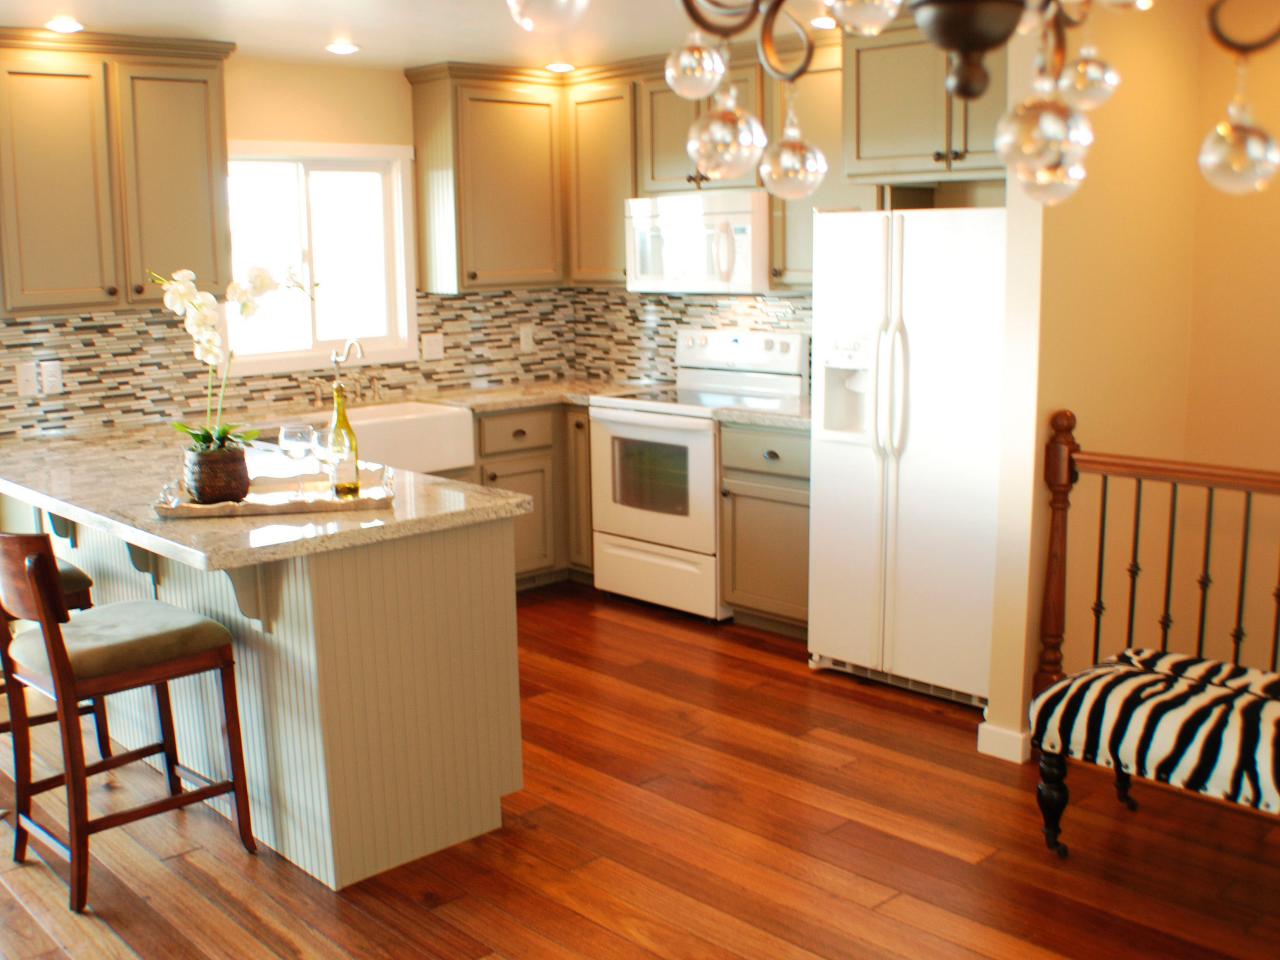 Some Quick Ideas on Fast and Affordable Kitchen Renovations